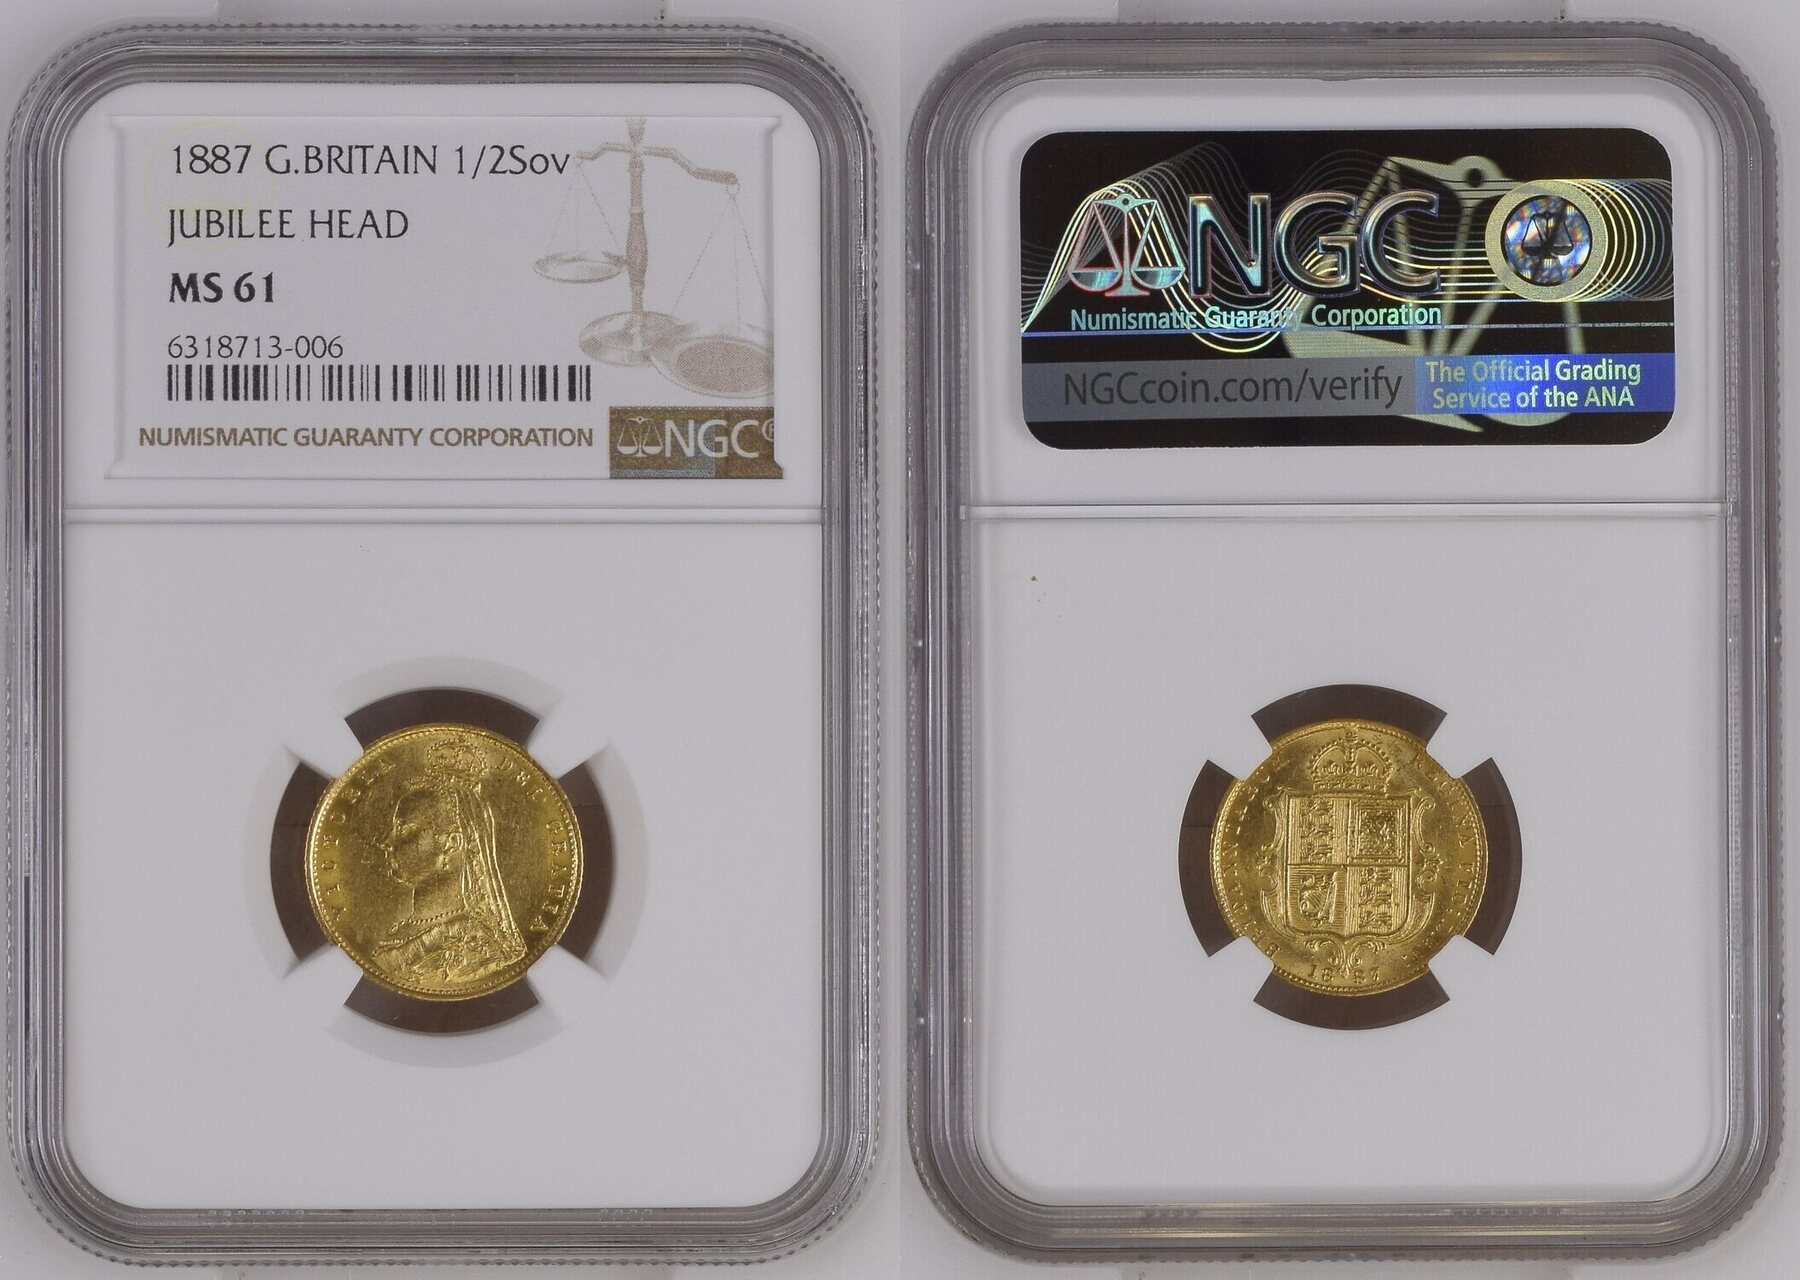 G.BRITAIN 1/2SOV GREAT BRITAIN 1/2 Sovereign 1887 VICTORIA gold NGC MS ...